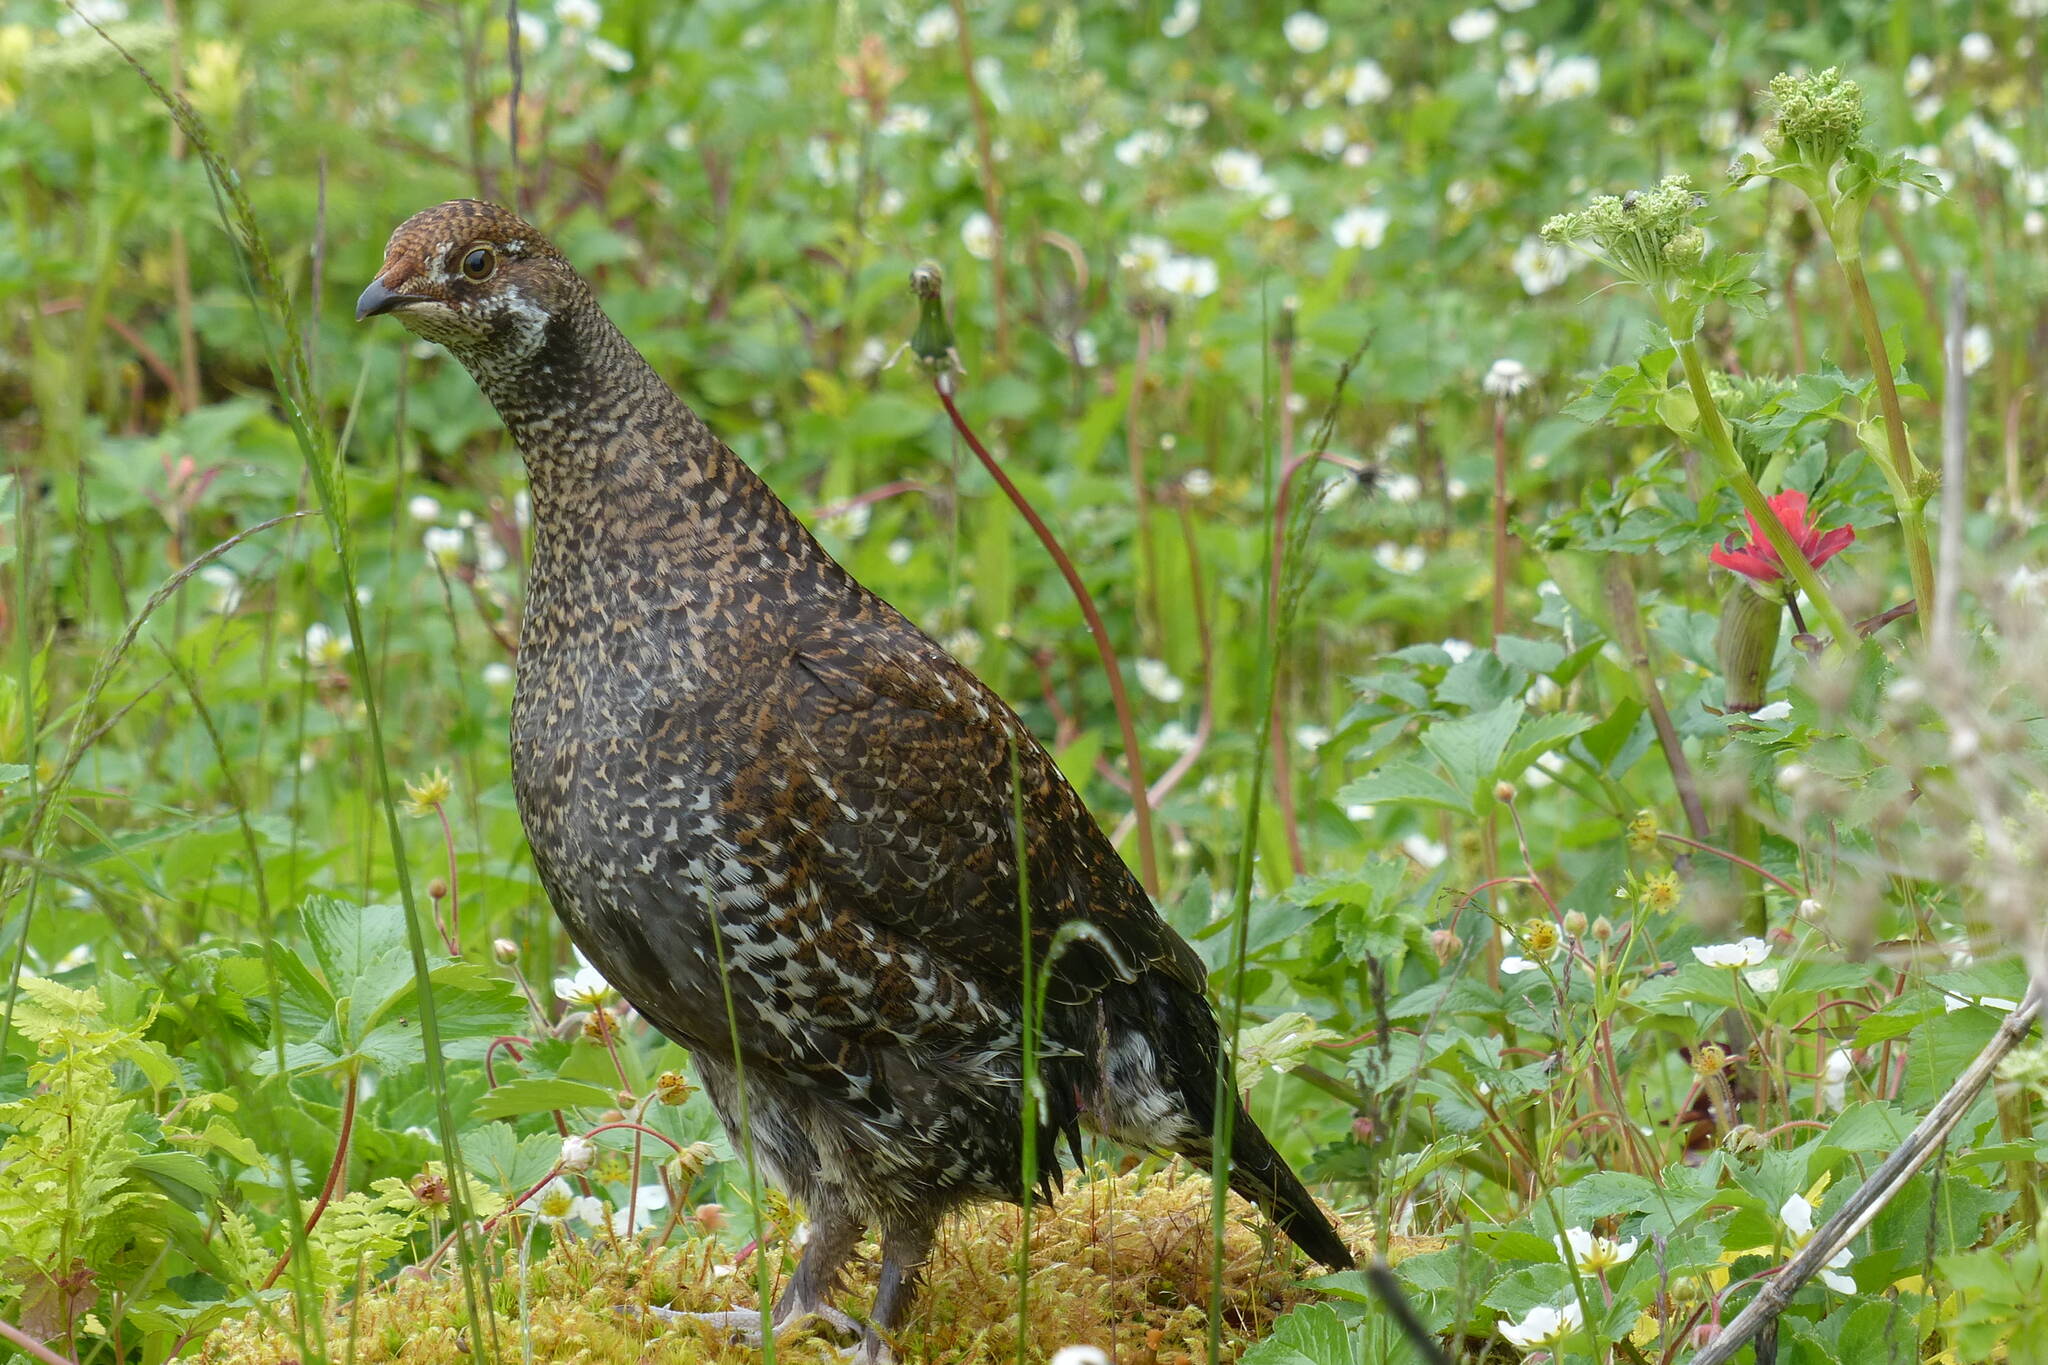 A sooty grouse alertly watches some approaching humans. (Photo by Pam Bergeson)